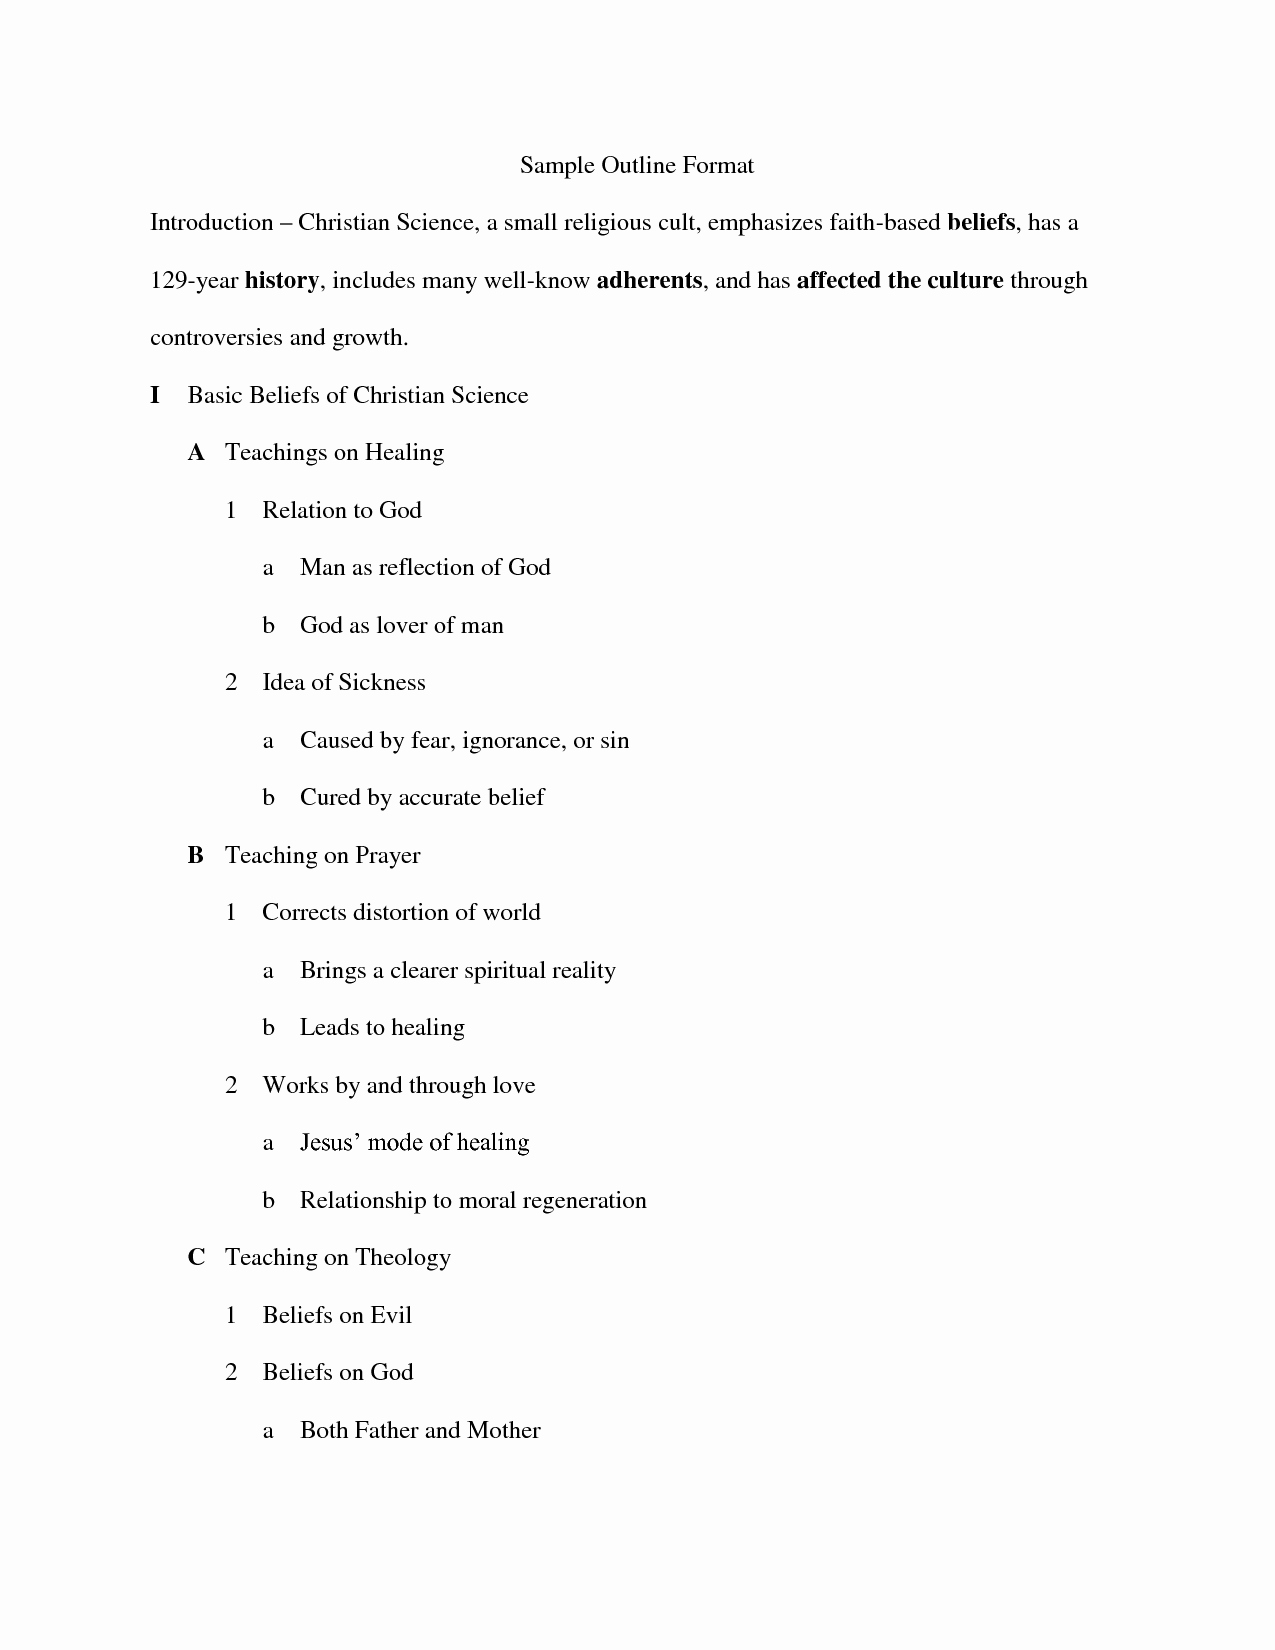 Apa Outline format Template Lovely Basic Outlines for A Research Paper Situation Regarding